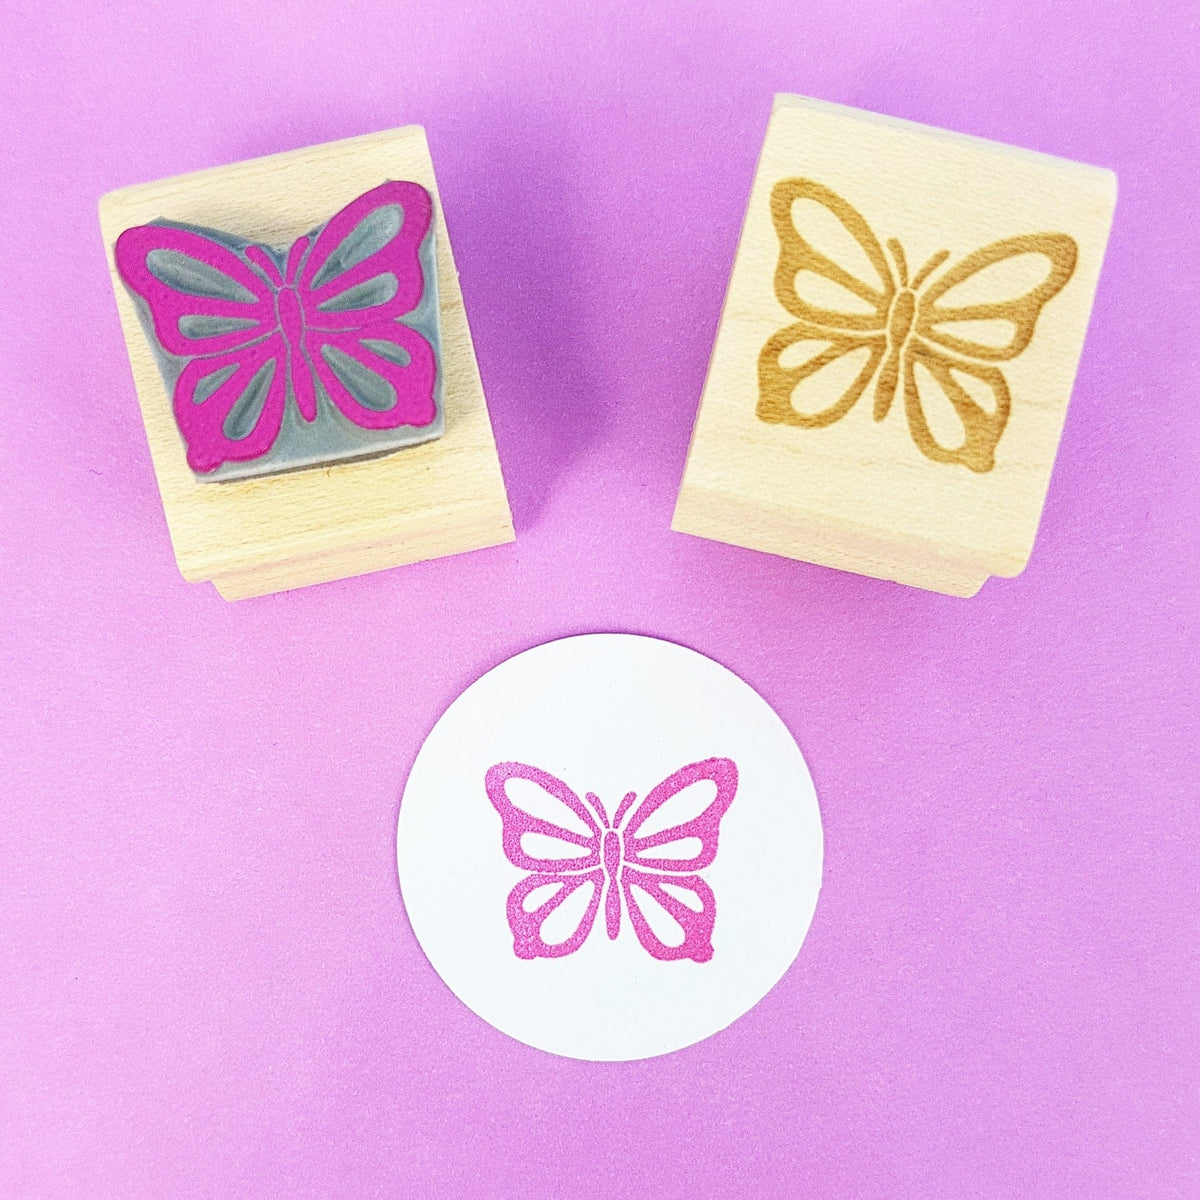 Skull and Cross Buns Dainty Butterfly Mini Rubber Stamp